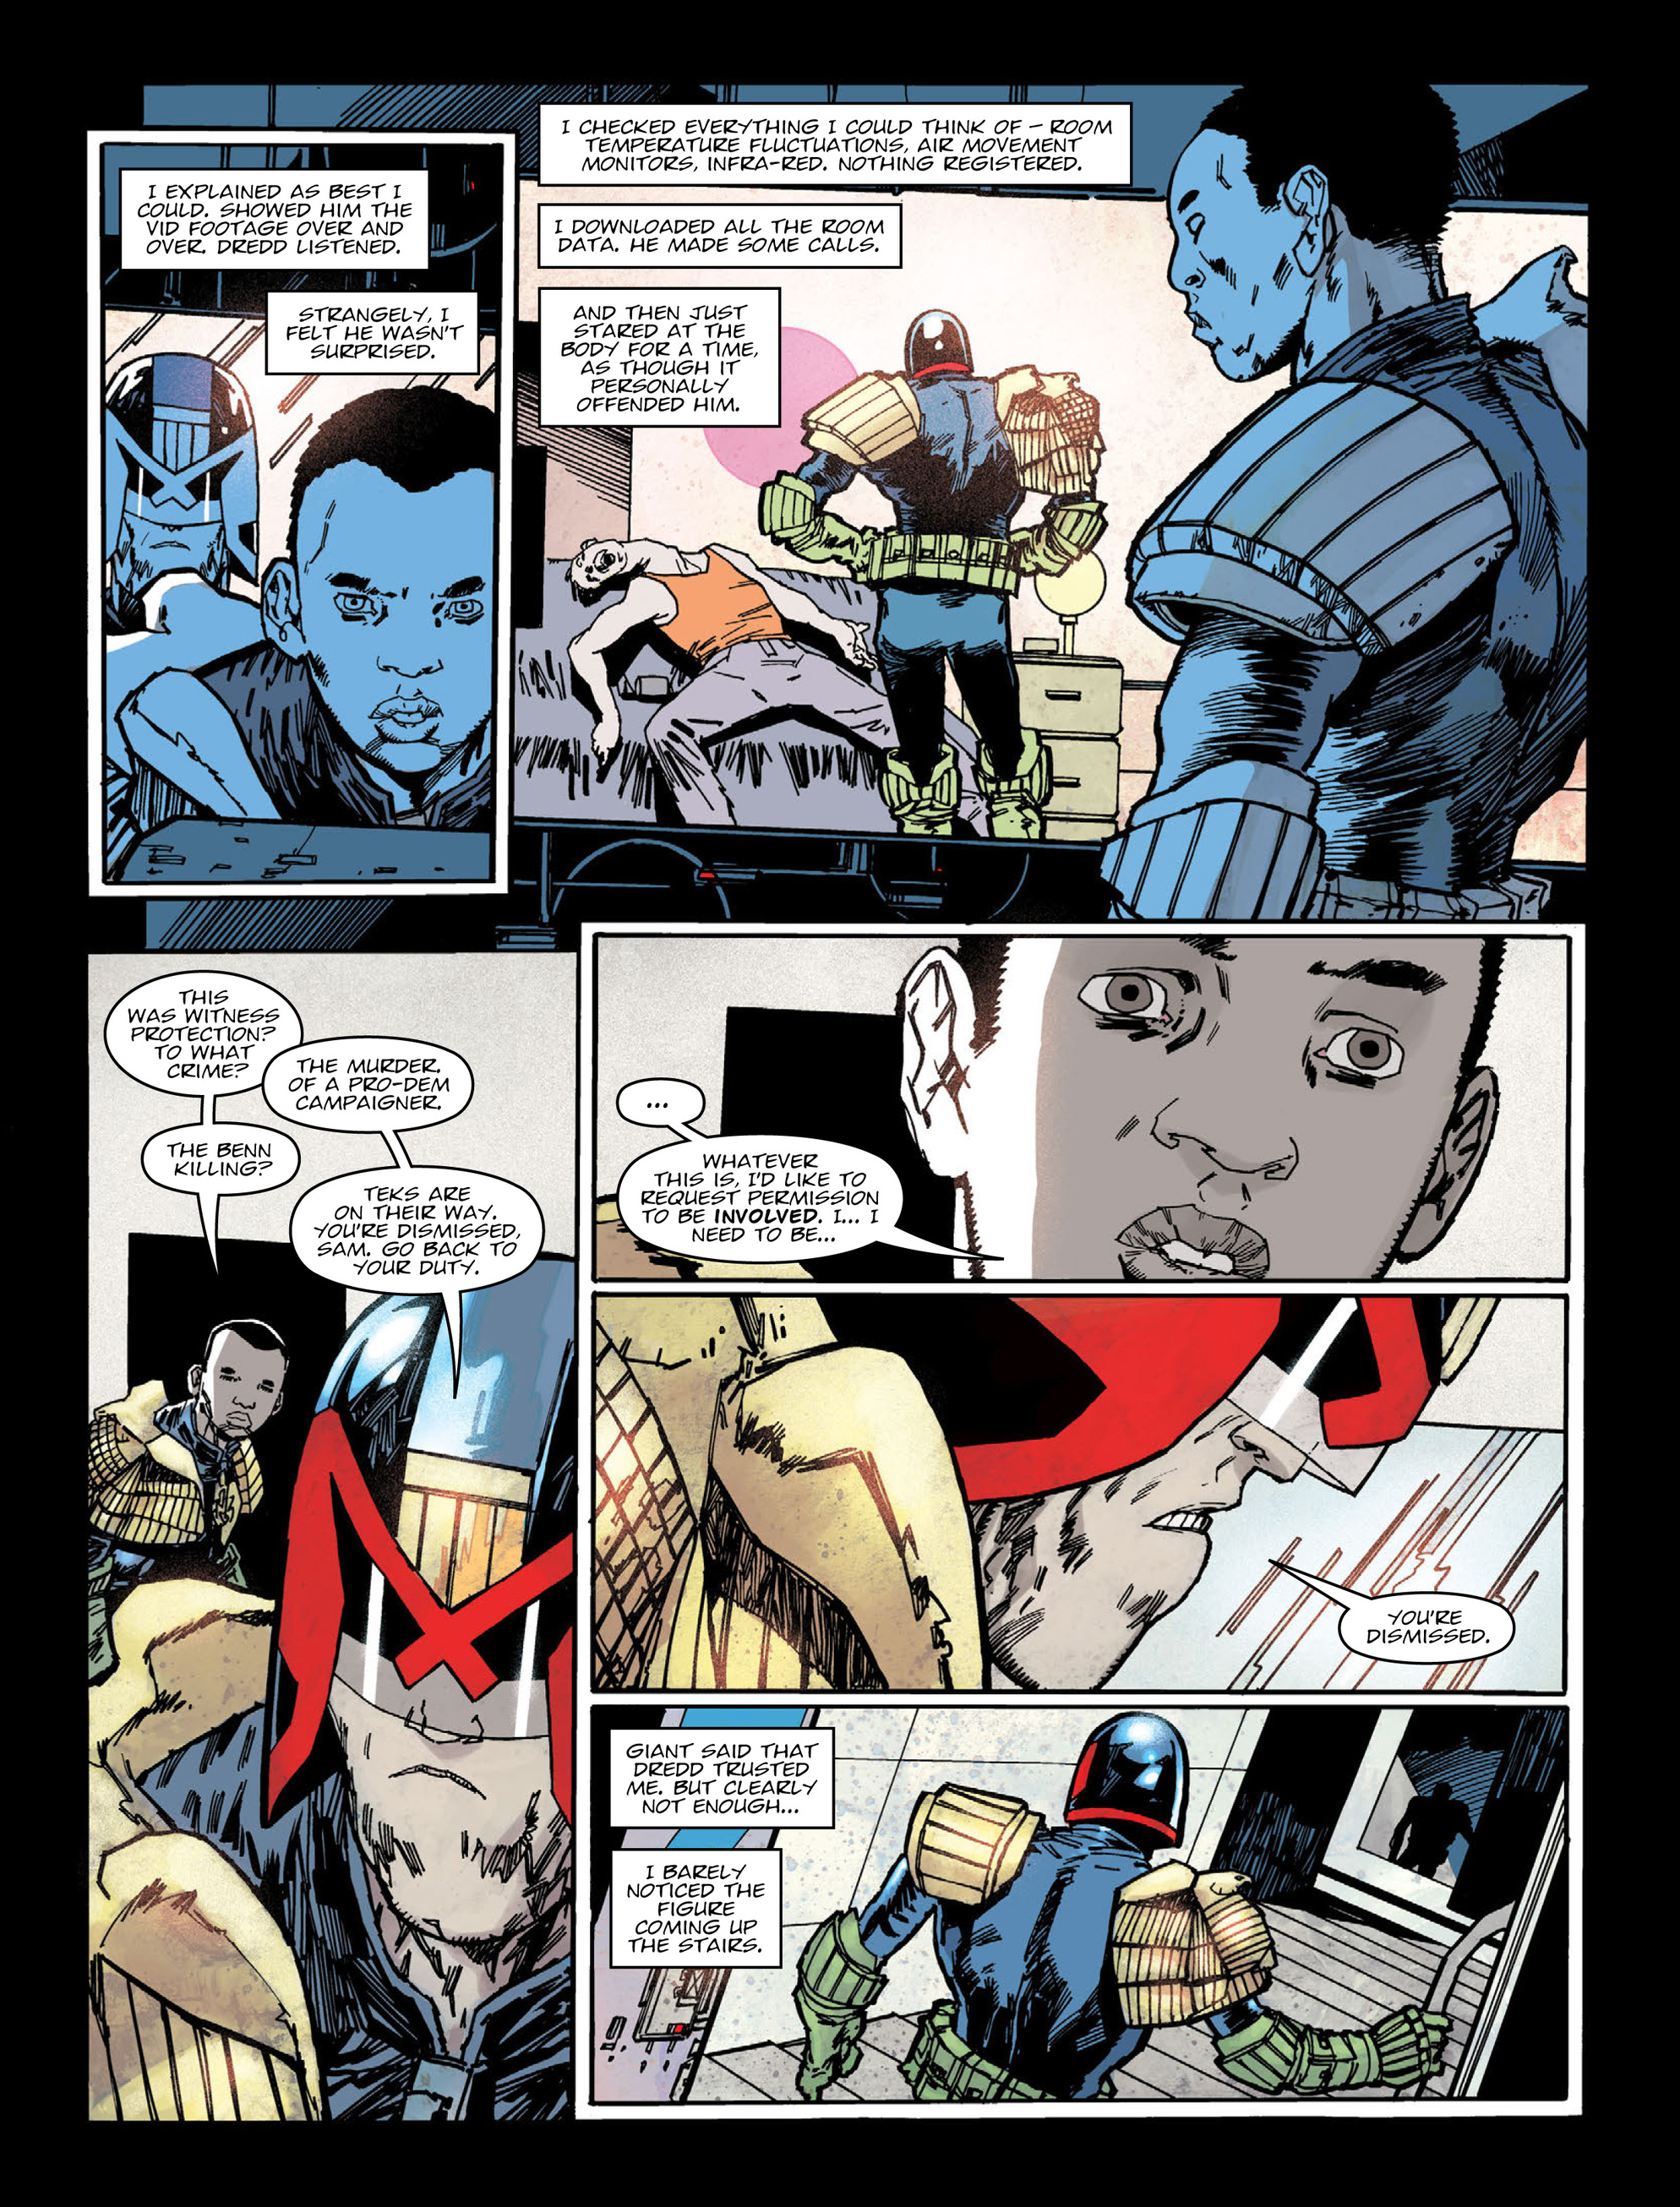 2000 AD: Chapter 2005 - Page 4